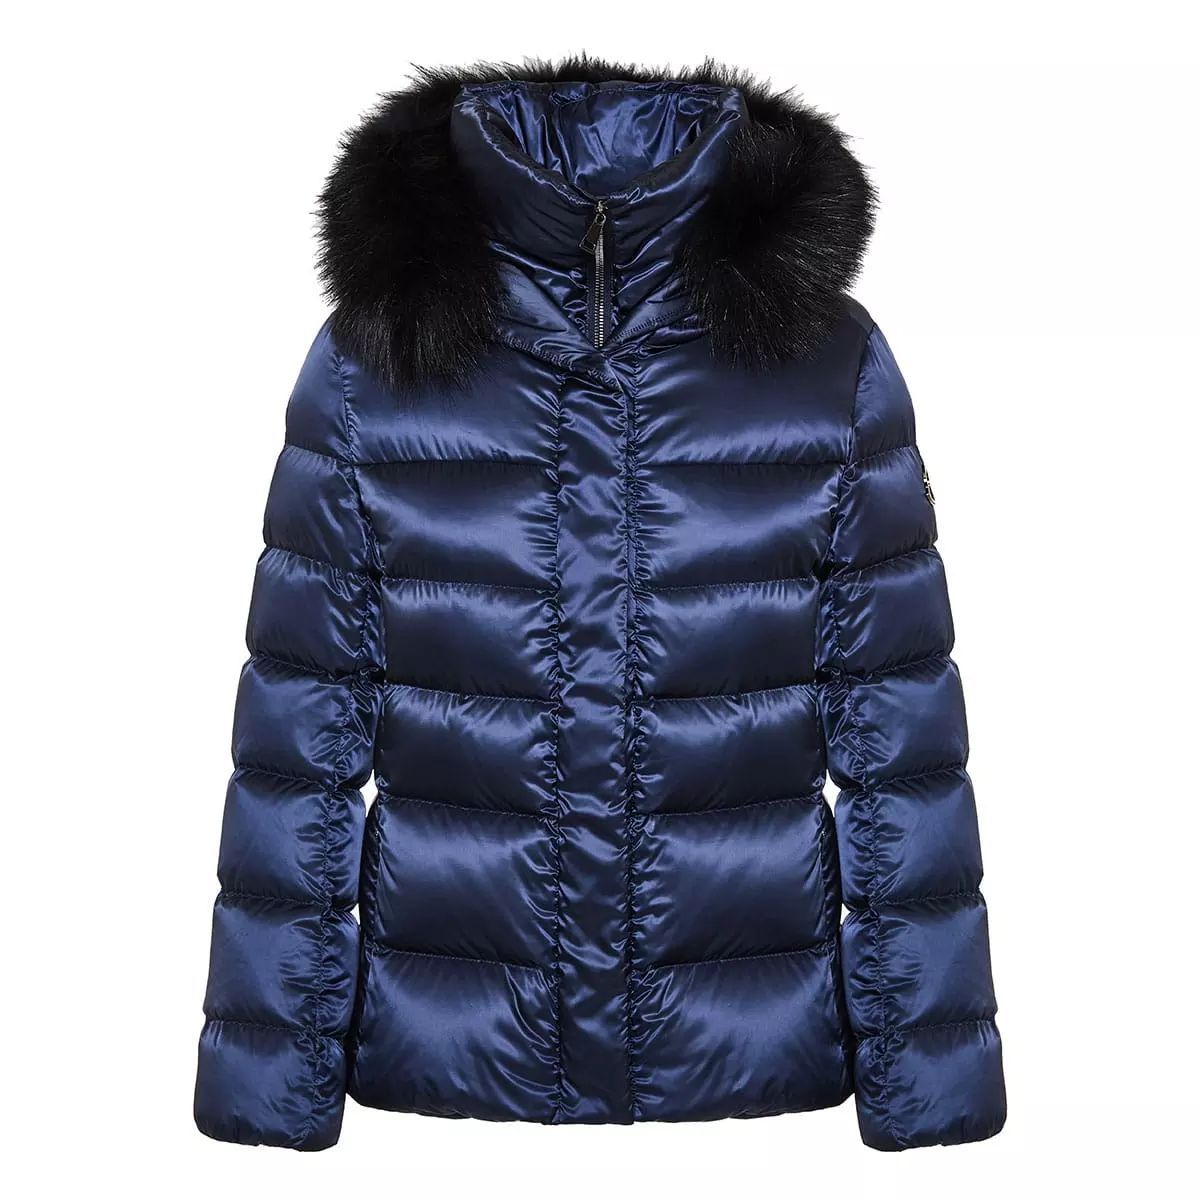 MONCLER Navy Blue Carryover Outerwear for Women - Classic Design